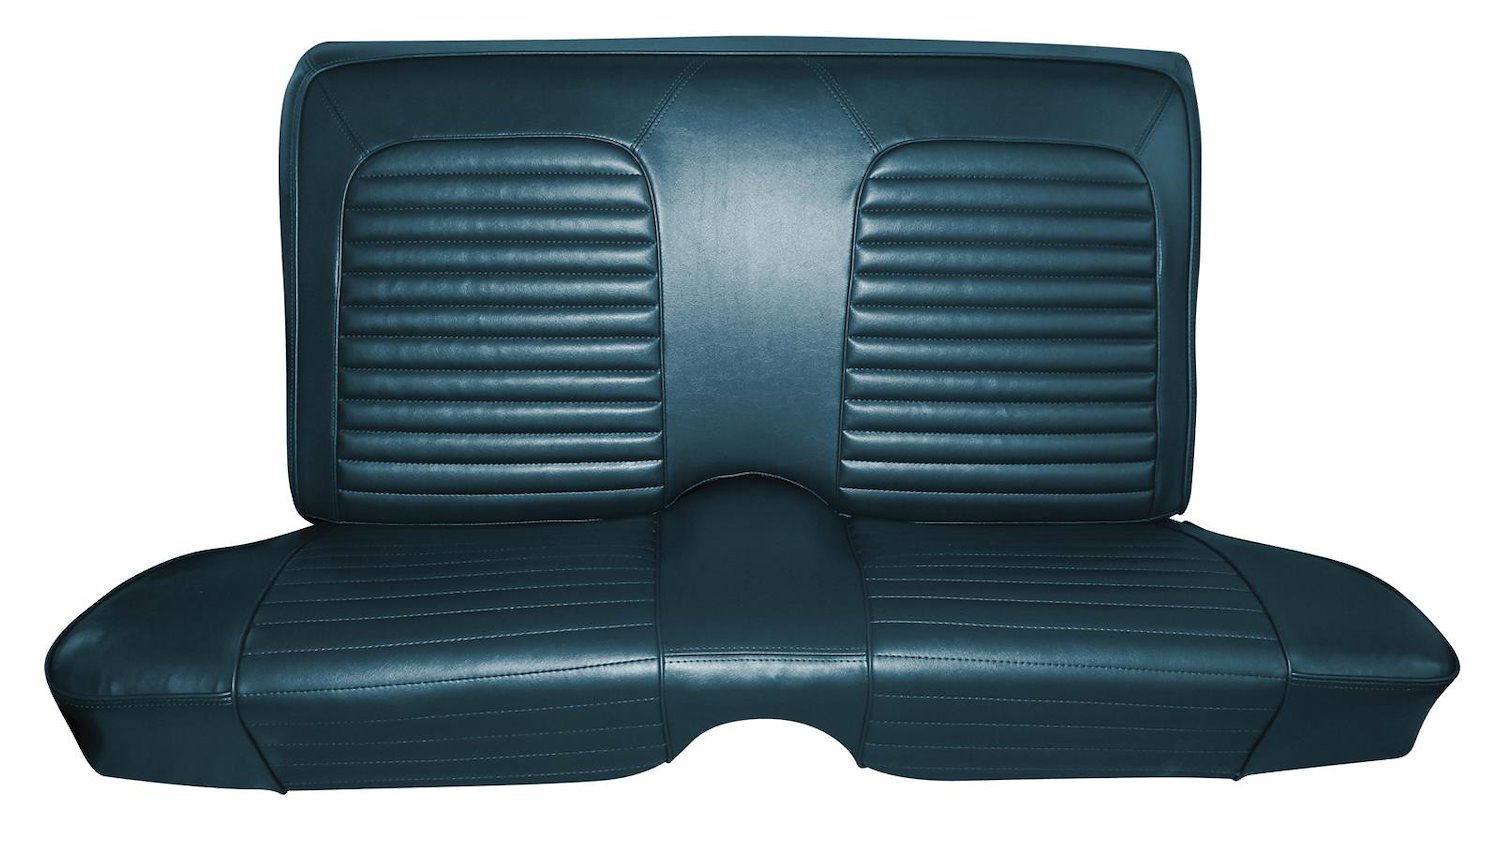 1968 Pontiac Firebird Custom-Deluxe Front Bench with Optional Fold-Down Rear Bench Upholstery Set